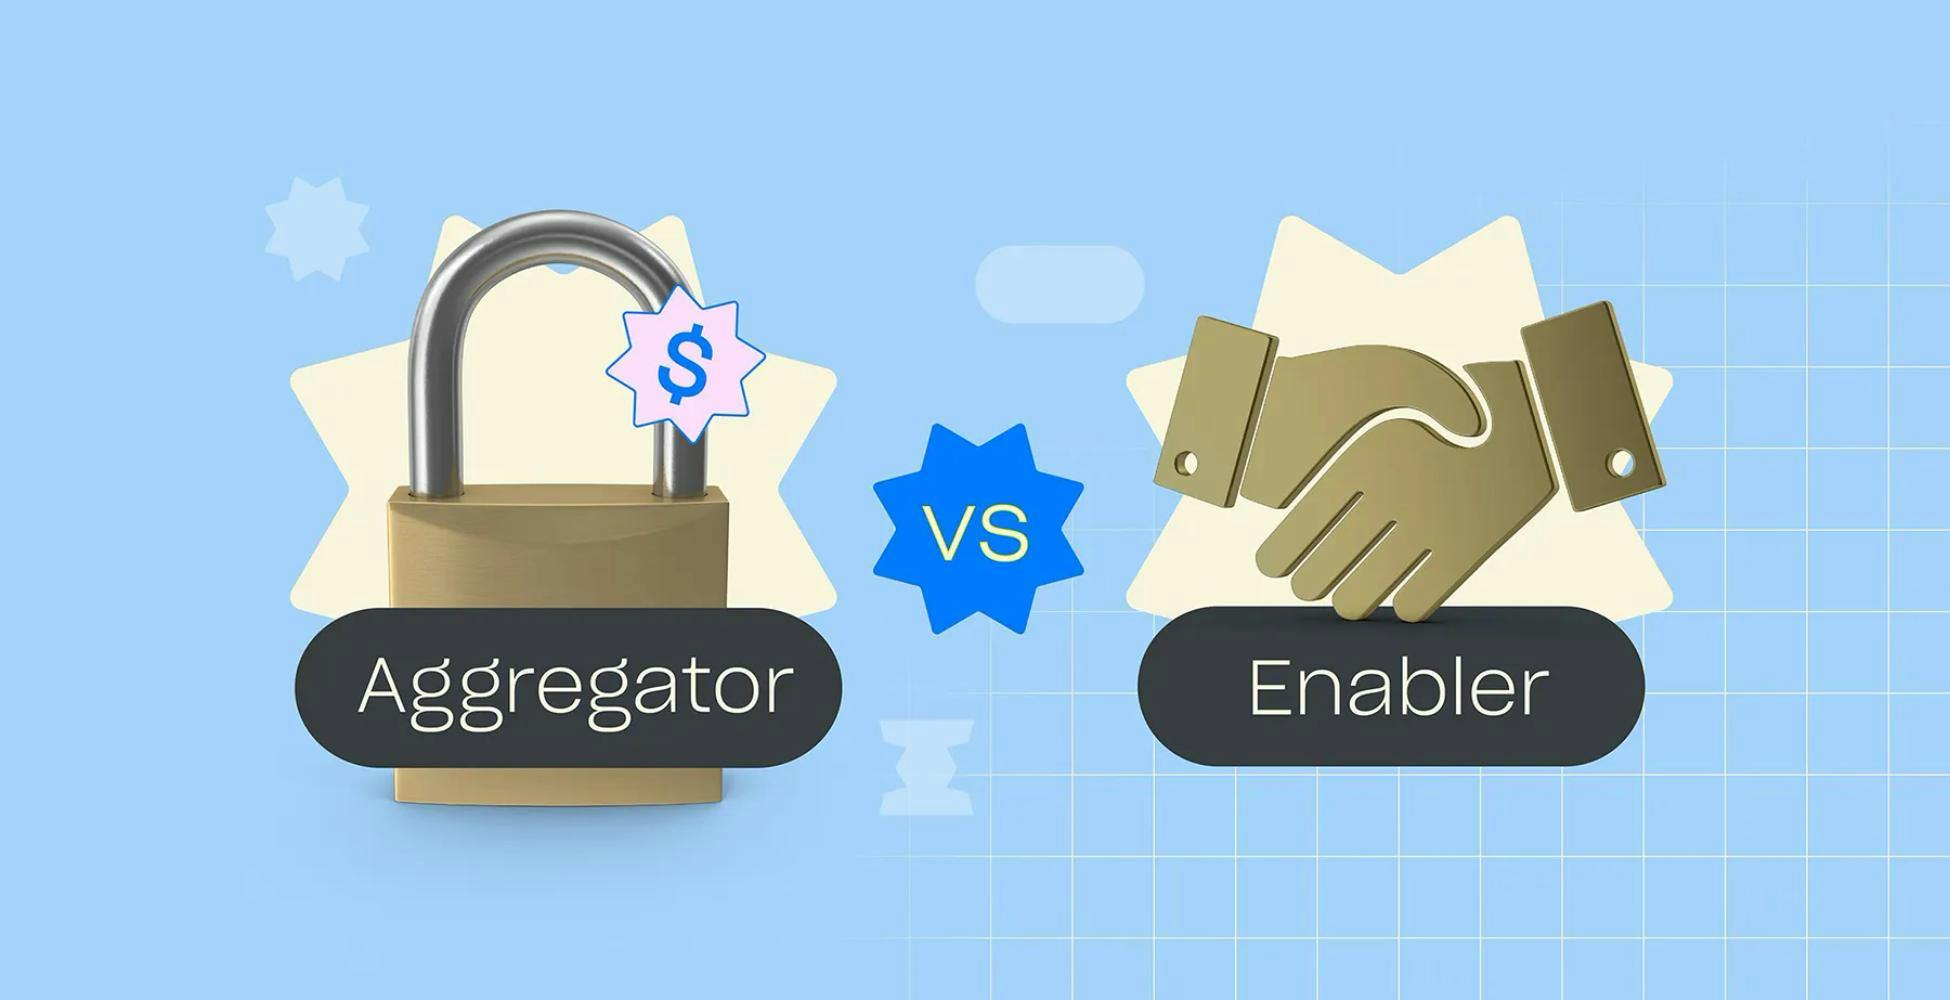 What's the difference between an aggregator and enabler